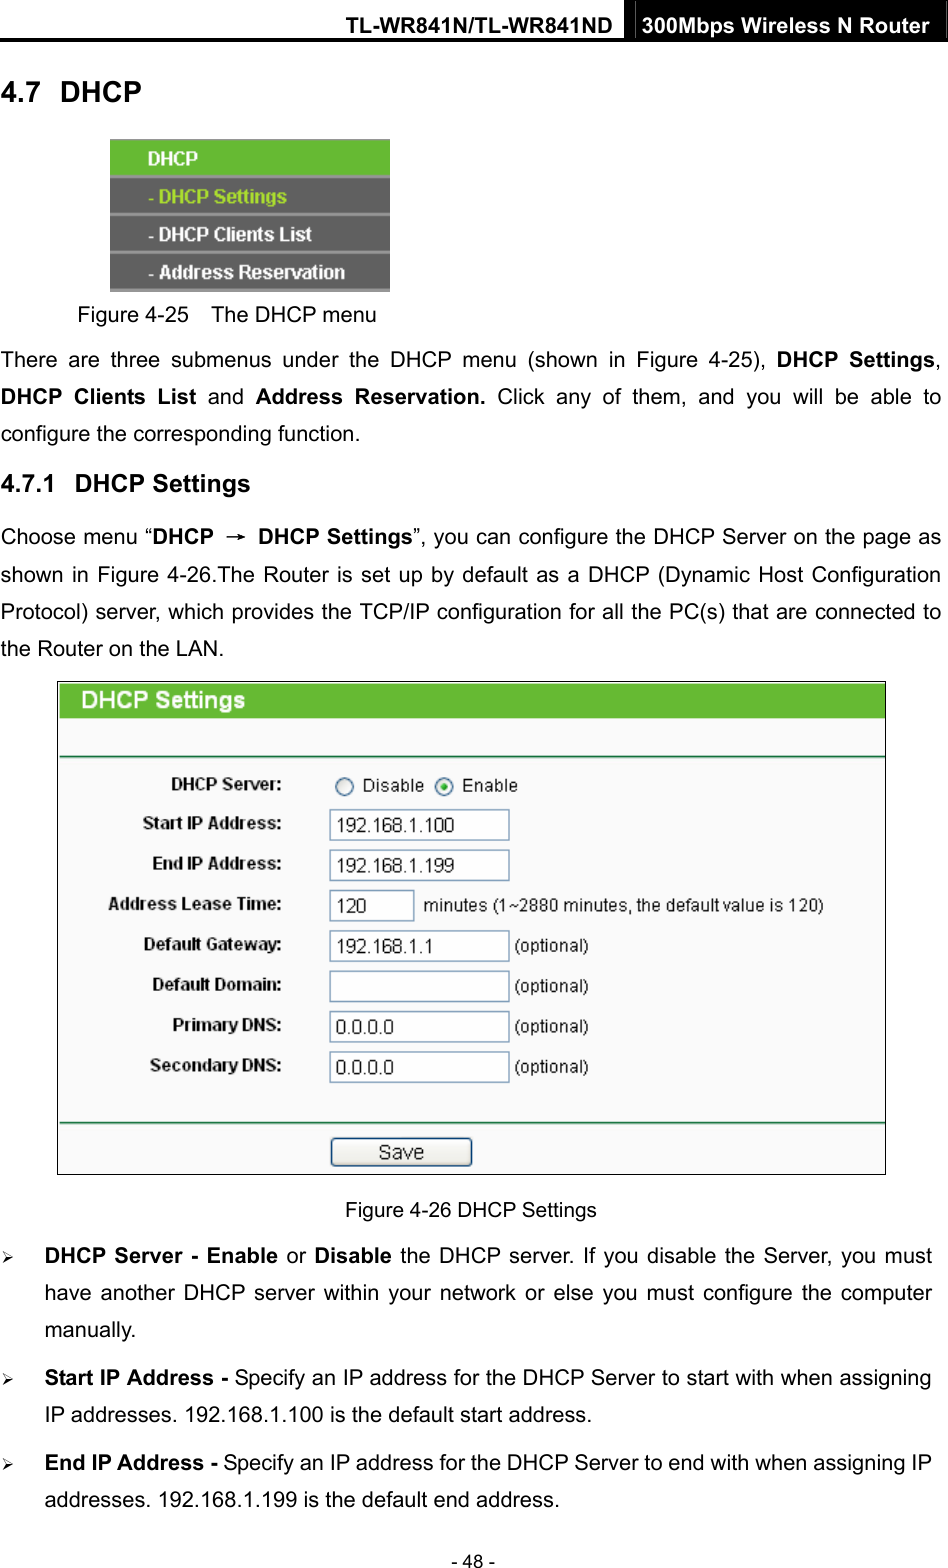 TL-WR841N/TL-WR841ND 300Mbps Wireless N Router - 48 - 4.7  DHCP  Figure 4-25    The DHCP menu There are three submenus under the DHCP menu (shown in Figure 4-25),  DHCP Settings, DHCP Clients List and  Address Reservation. Click any of them, and you will be able to configure the corresponding function. 4.7.1  DHCP Settings Choose menu “DHCP  → DHCP Settings”, you can configure the DHCP Server on the page as shown in Figure 4-26.The Router is set up by default as a DHCP (Dynamic Host Configuration Protocol) server, which provides the TCP/IP configuration for all the PC(s) that are connected to the Router on the LAN.    Figure 4-26 DHCP Settings ¾ DHCP Server - Enable or Disable the DHCP server. If you disable the Server, you must have another DHCP server within your network or else you must configure the computer manually. ¾ Start IP Address - Specify an IP address for the DHCP Server to start with when assigning IP addresses. 192.168.1.100 is the default start address. ¾ End IP Address - Specify an IP address for the DHCP Server to end with when assigning IP addresses. 192.168.1.199 is the default end address. 